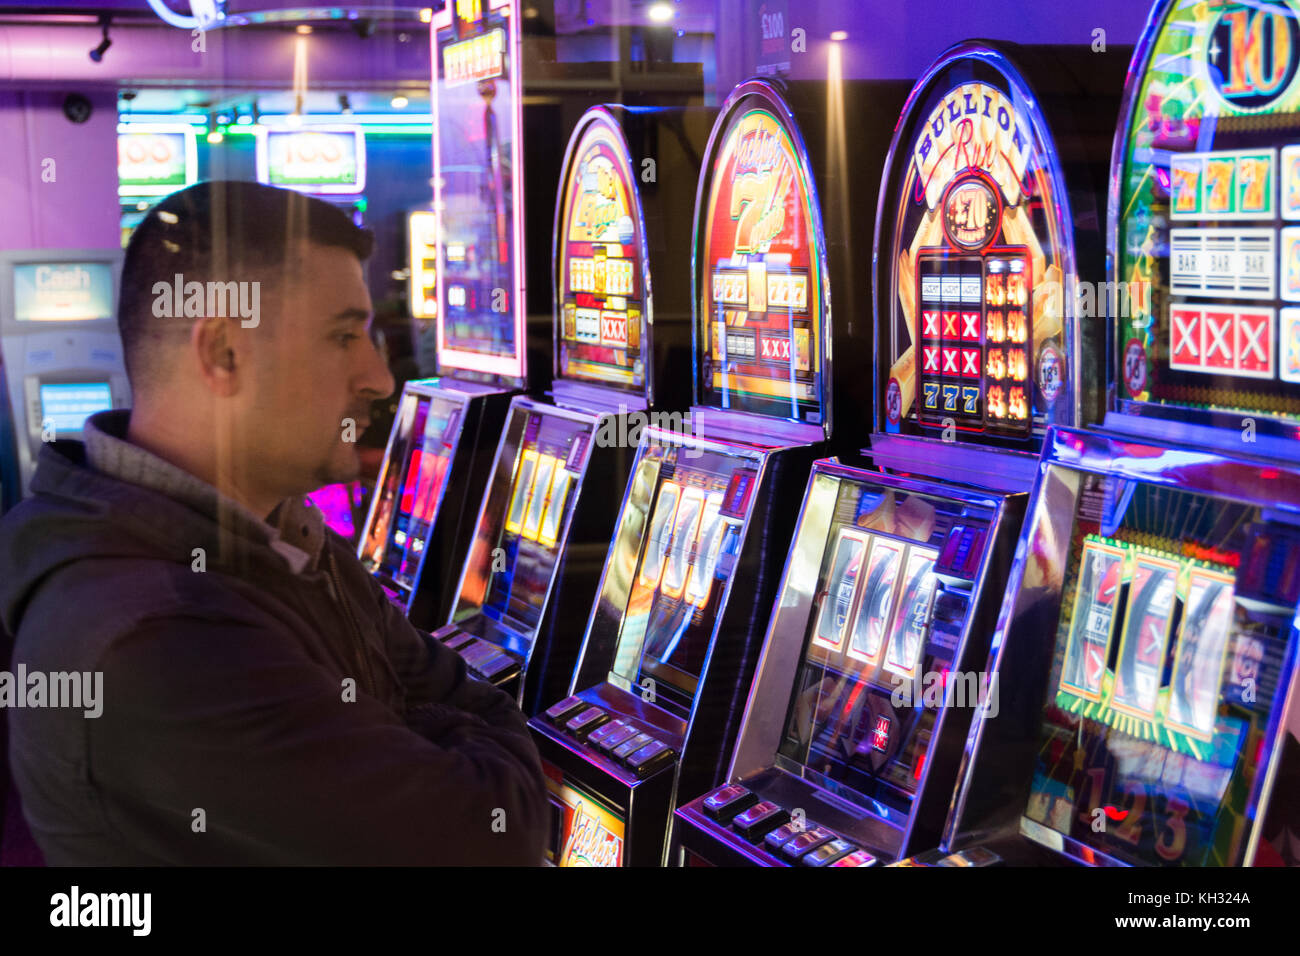 A man plays the slot machines in an amusement arcade in Chinatown in London's West End, UK Stock Photo